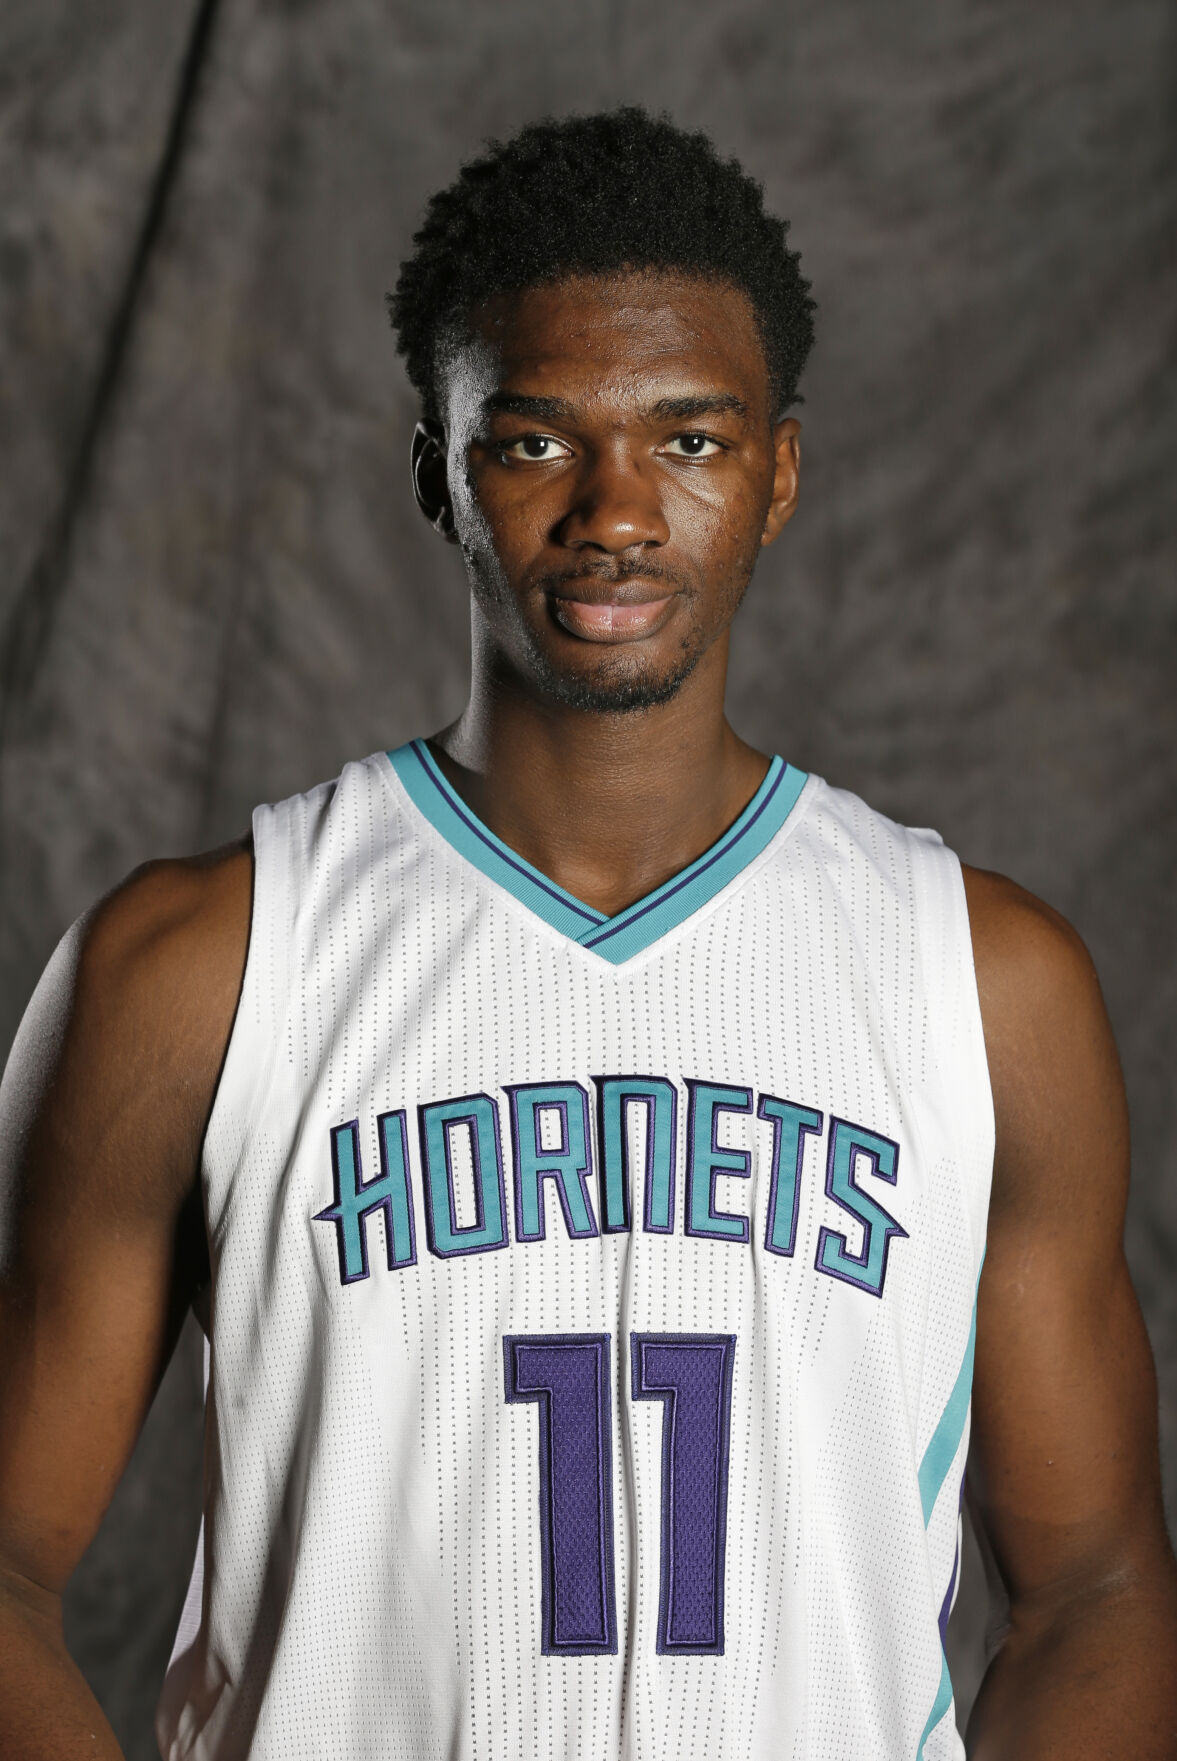 Indiana Basketball: Noah Vonleh shipped to Denver in four-team deal